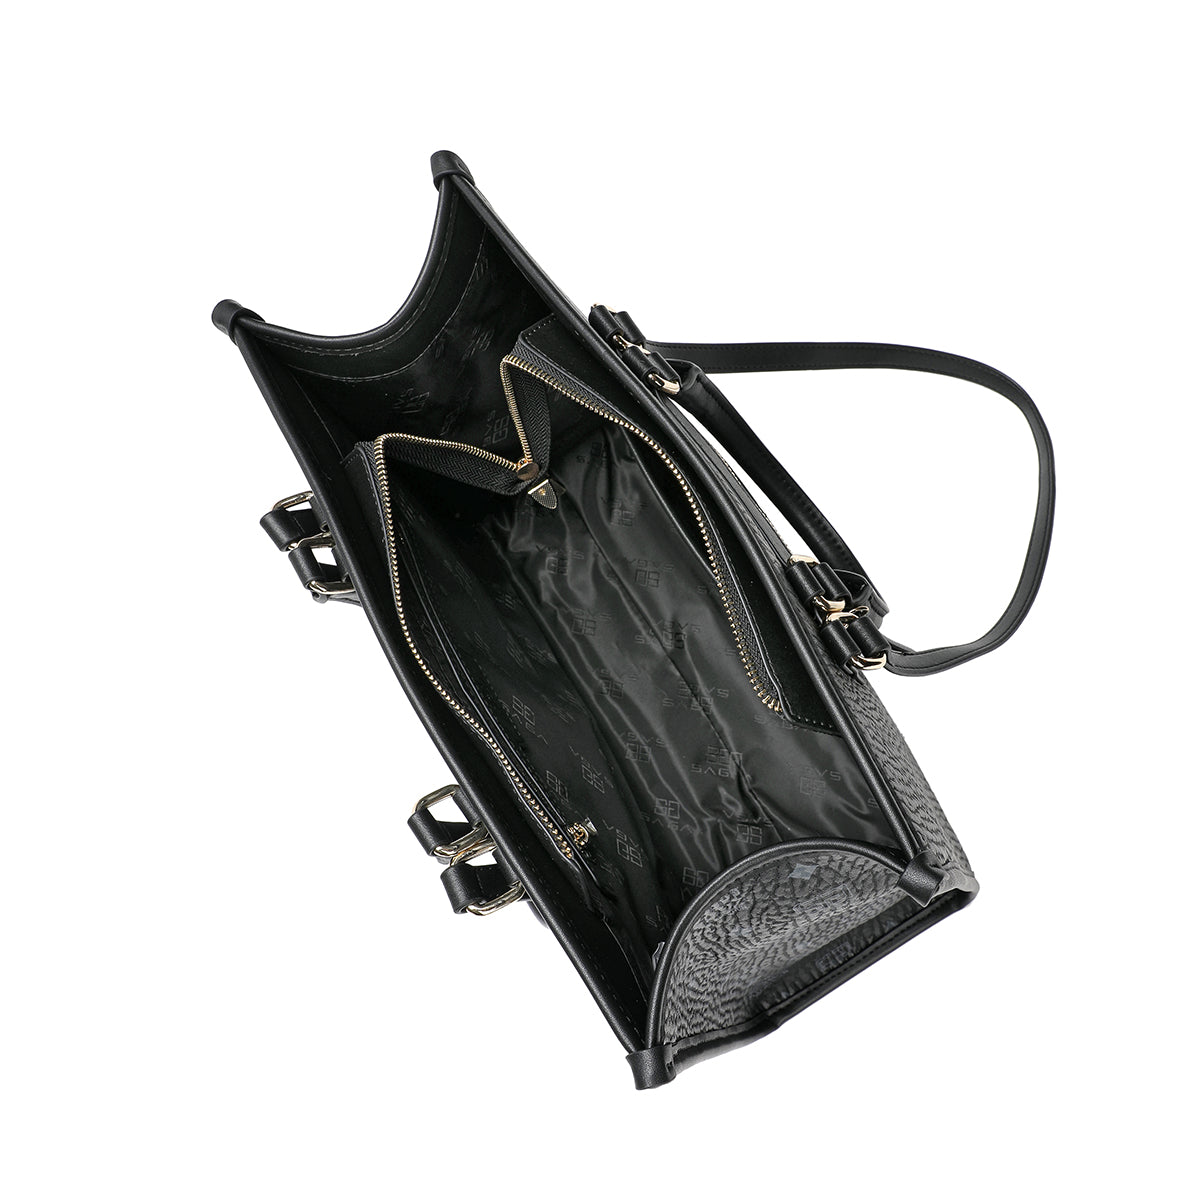 A spacious luxury leather bag with a wonderful design, 36 cm wide, black colour